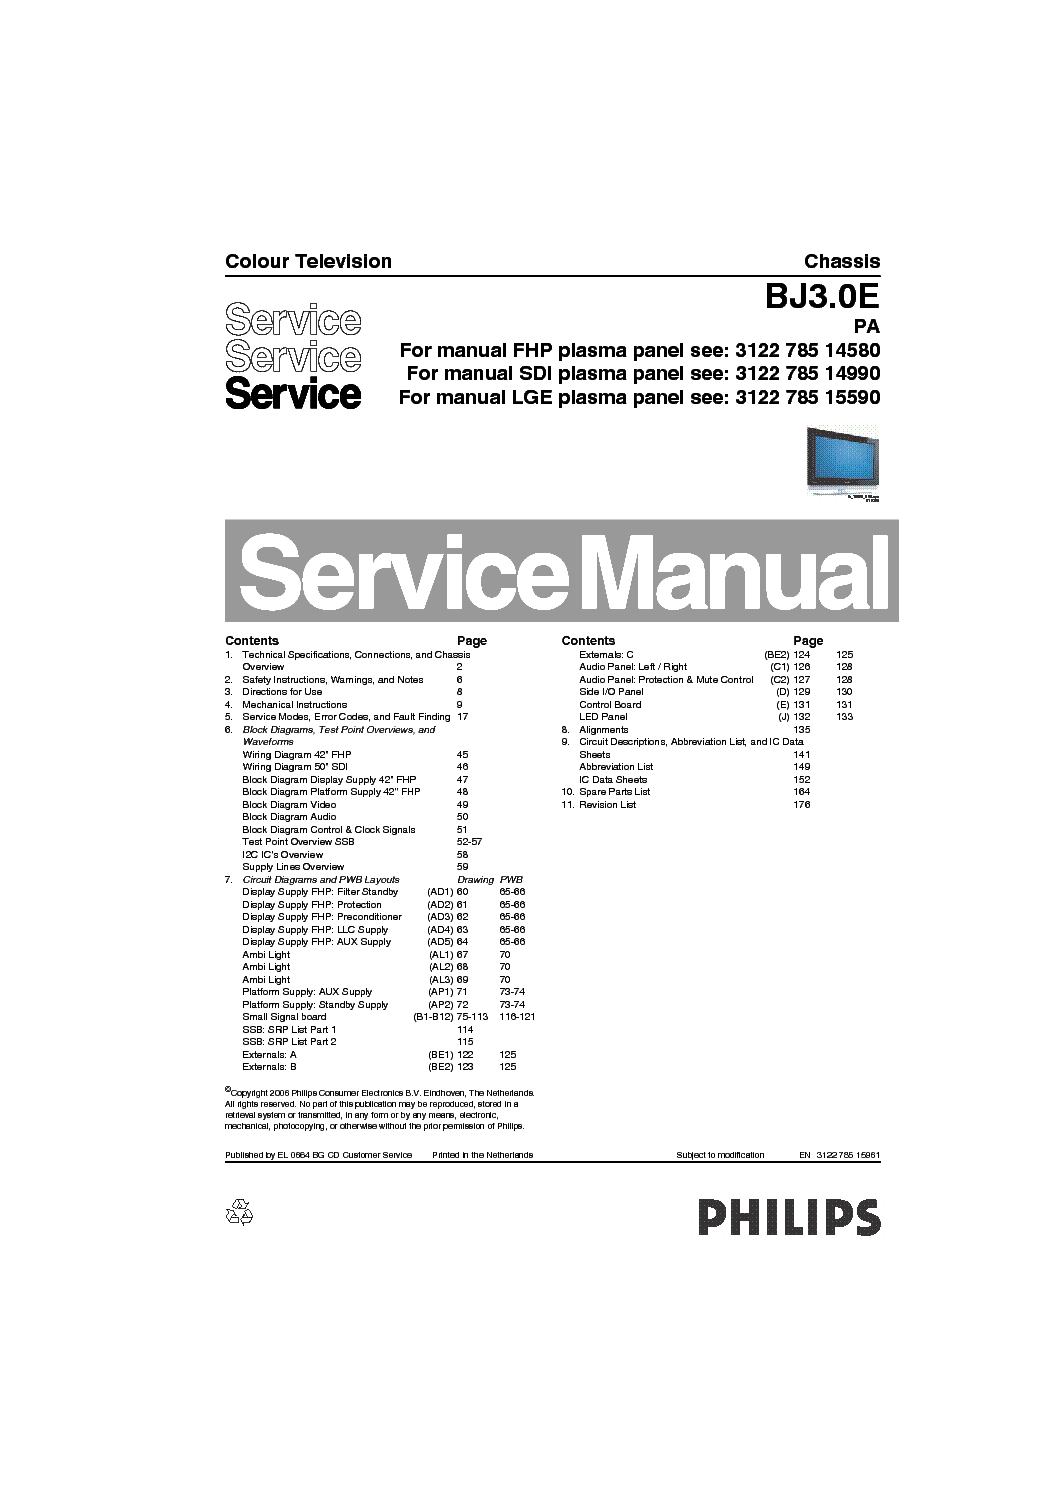 PHILIPS CHASSIS BJ3.0E-PA service manual (1st page)